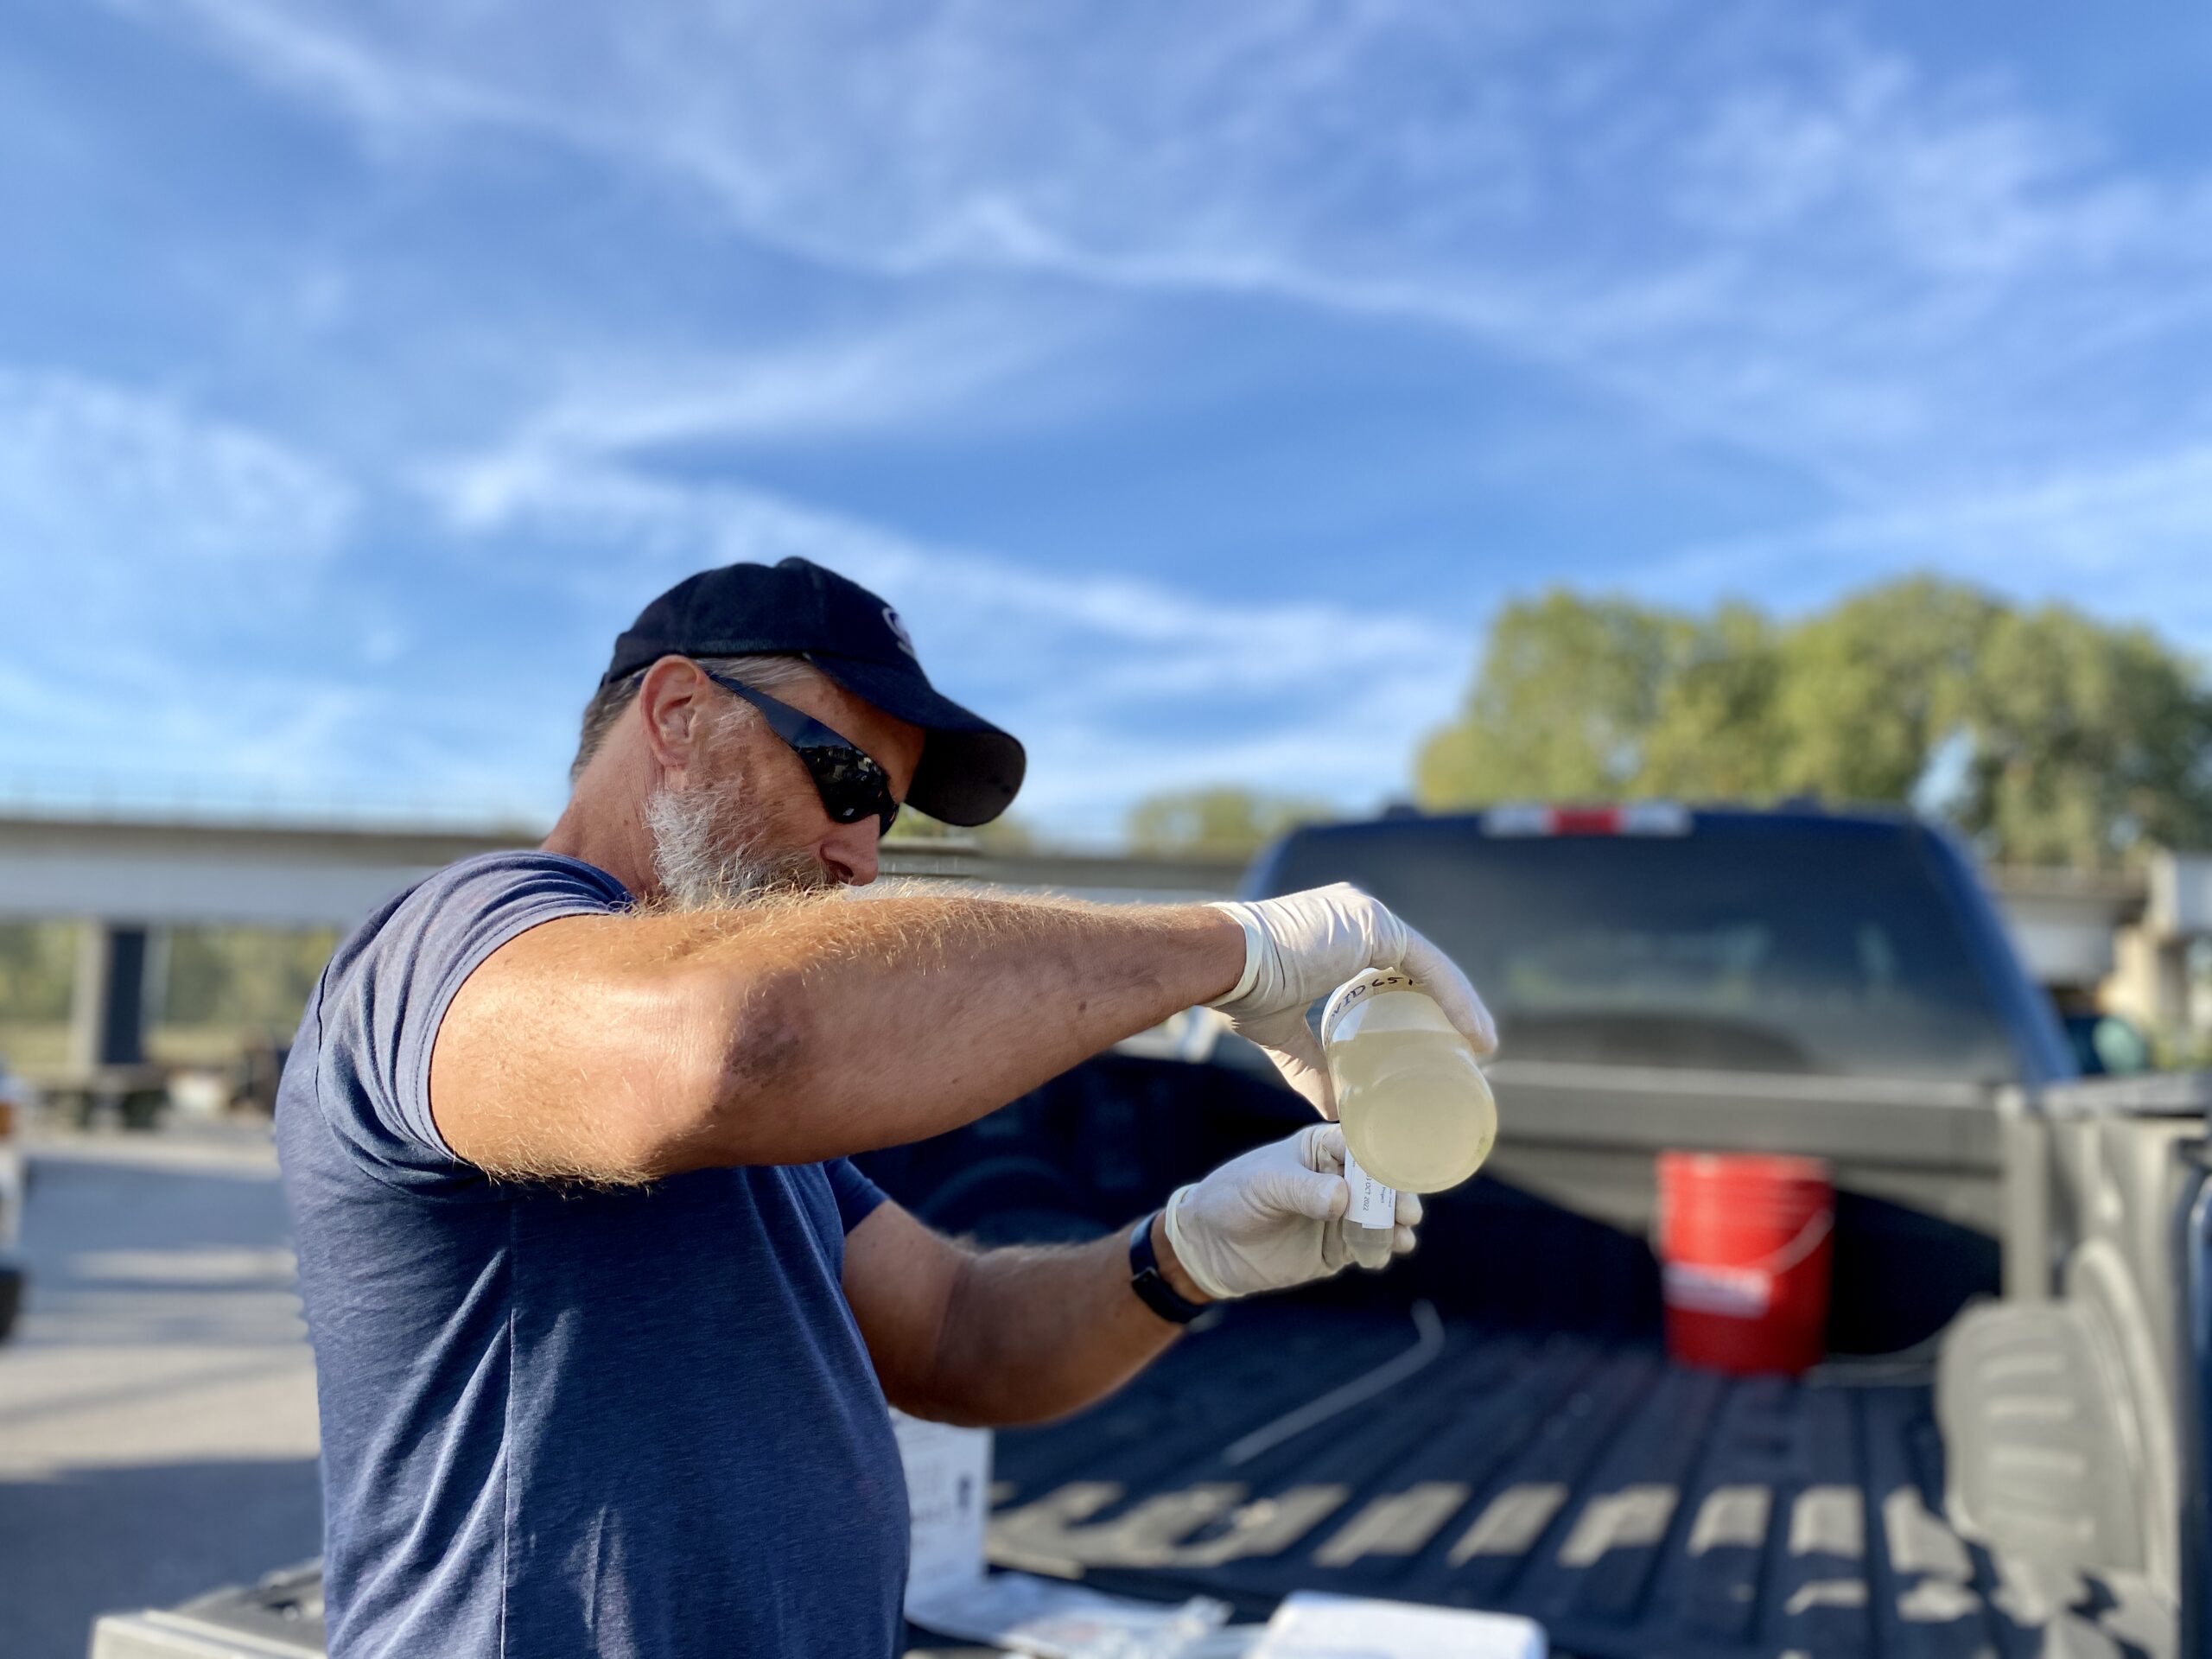 Scott Goins, KC Water's senior plant operator, pours the wastewater into the COVID-19 test tube, which will be shipped to the lab for further testing. (Vicky Diaz-Camacho | Flatland)